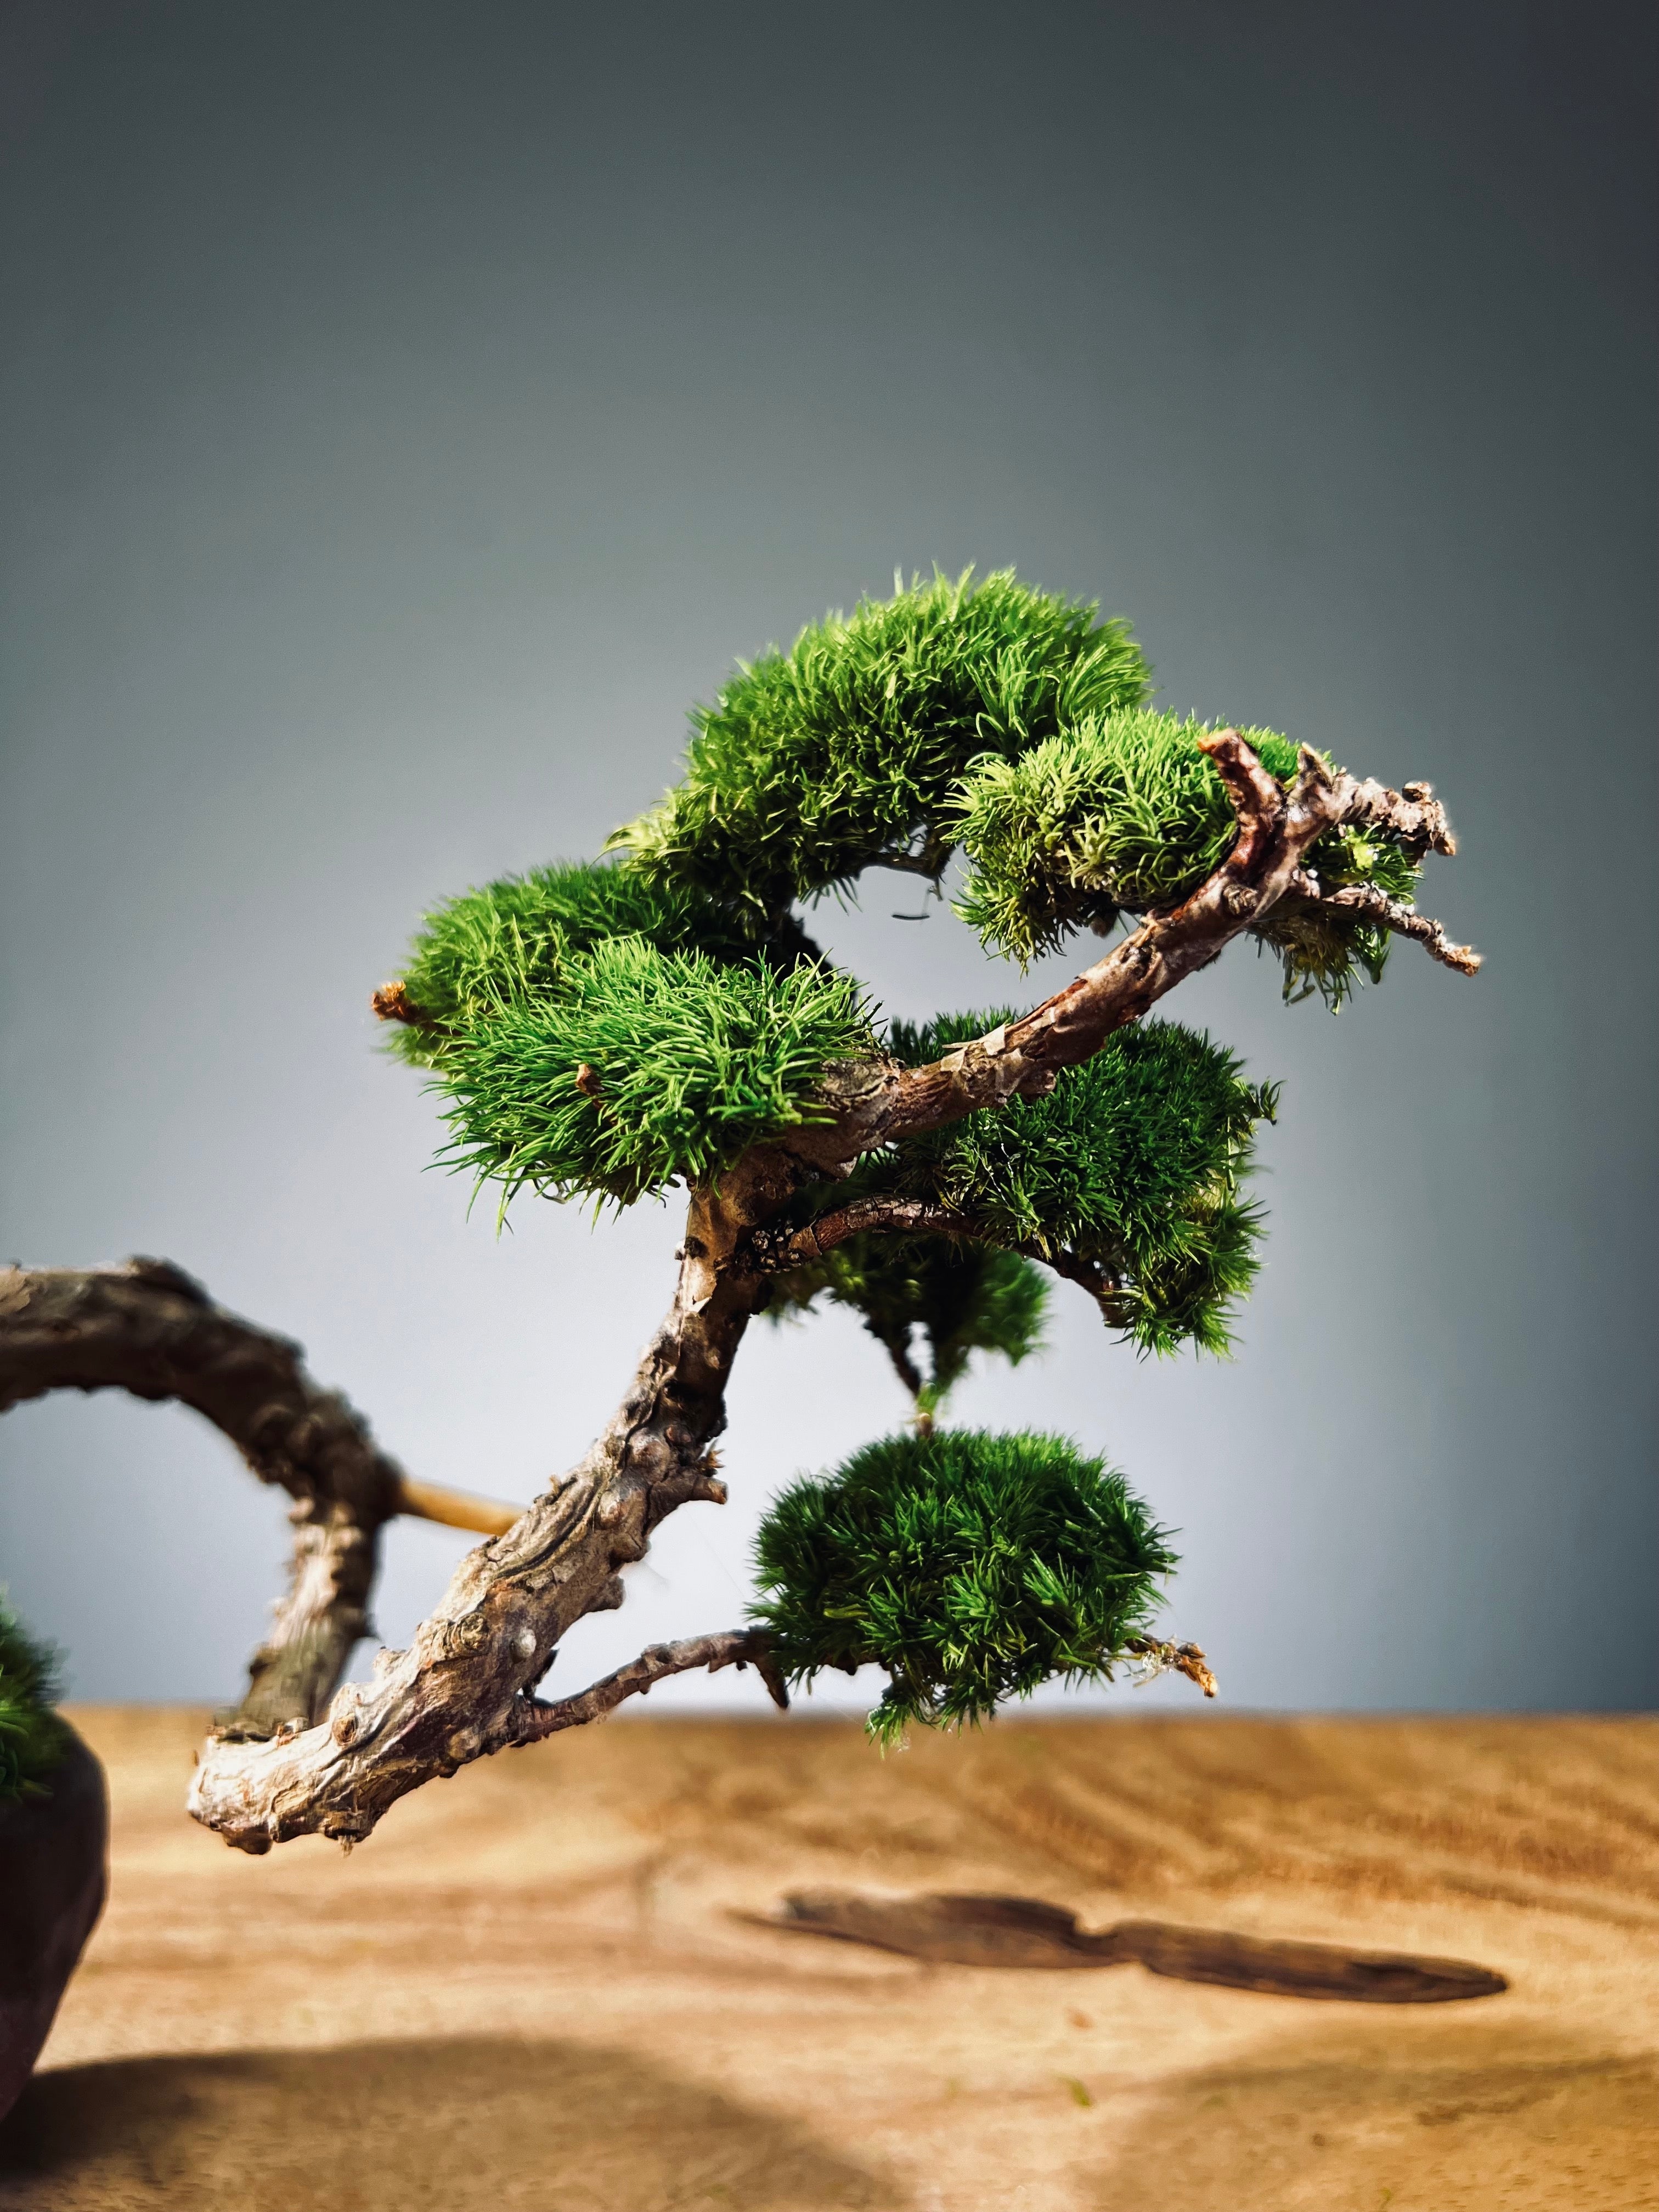 Juniper by the Winding Path - Handmade Clay edition (Preserved Plants)